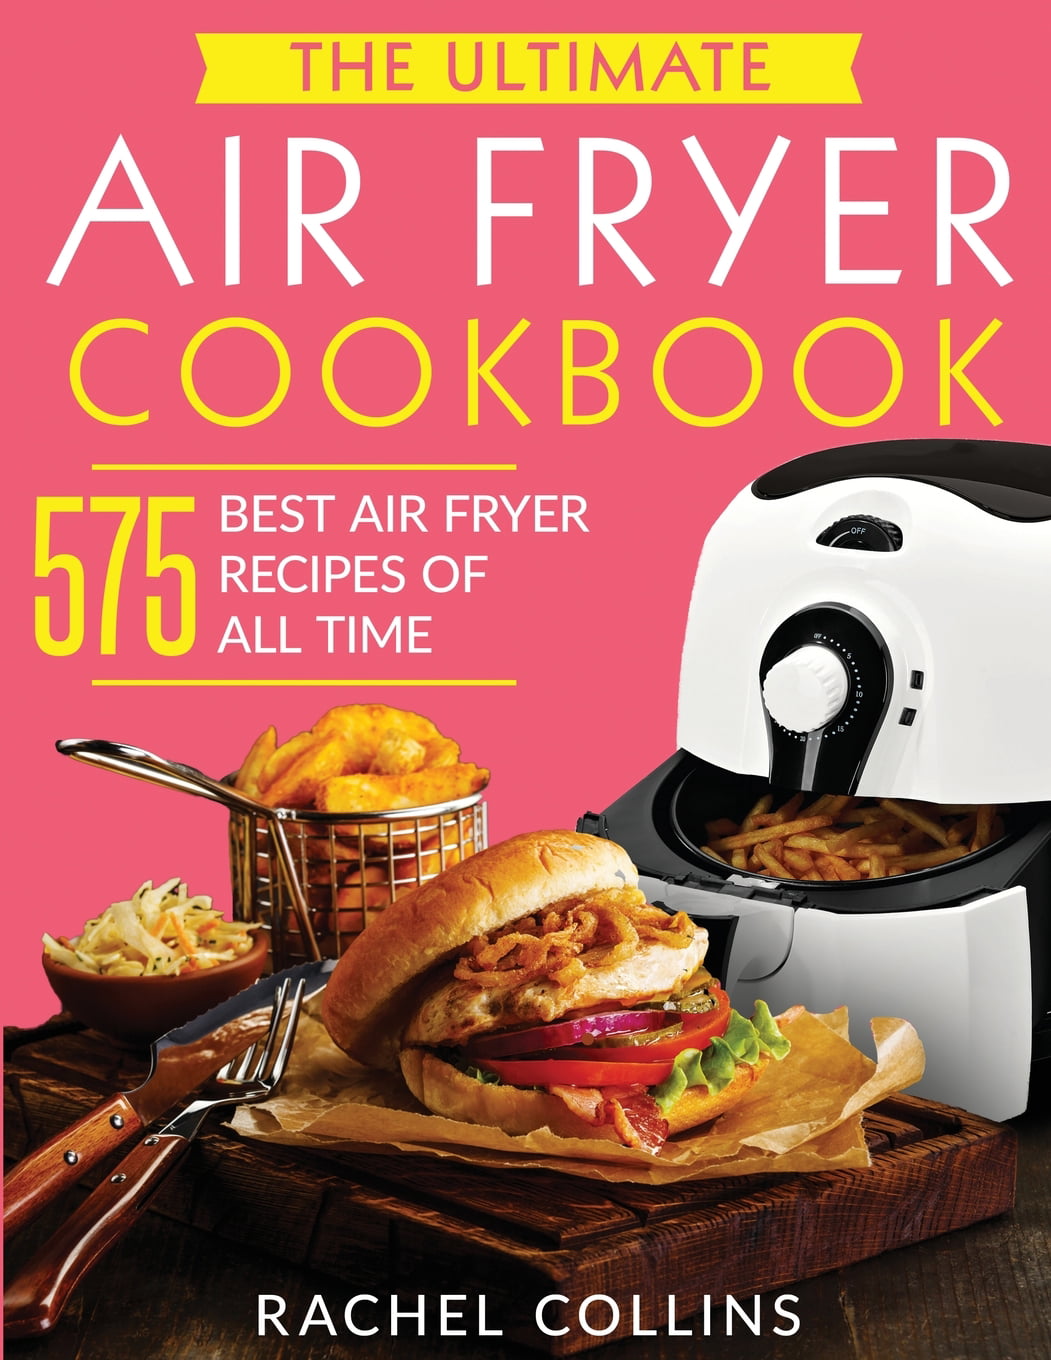 The Ultimate Air Fryer Cookbook 575 Best Air Fryer Recipes Of All